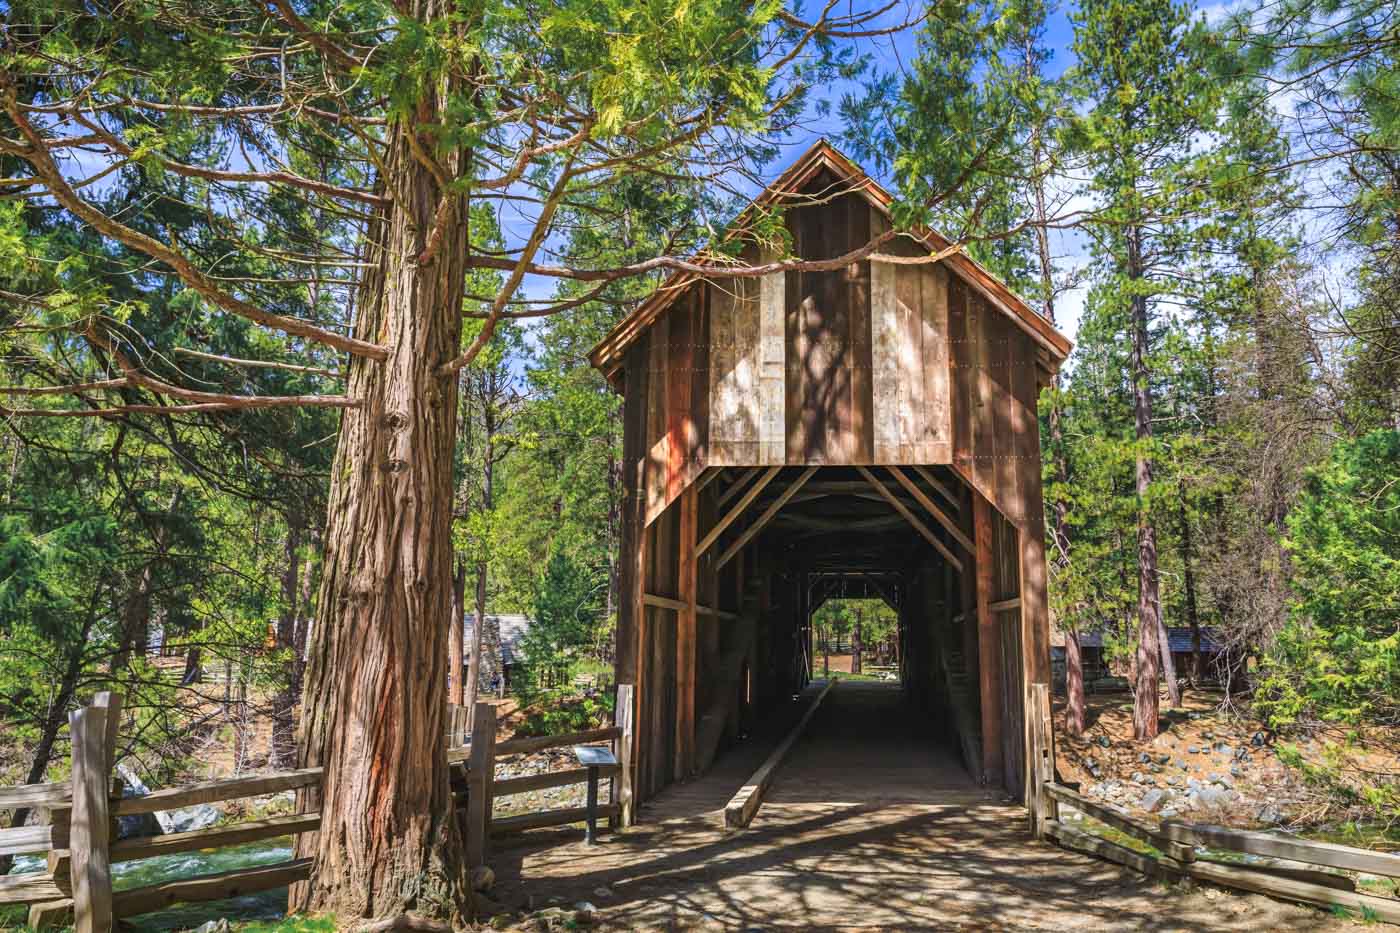 The old, wooden Wawona covered bridge in the middle of the Yosemite forest.